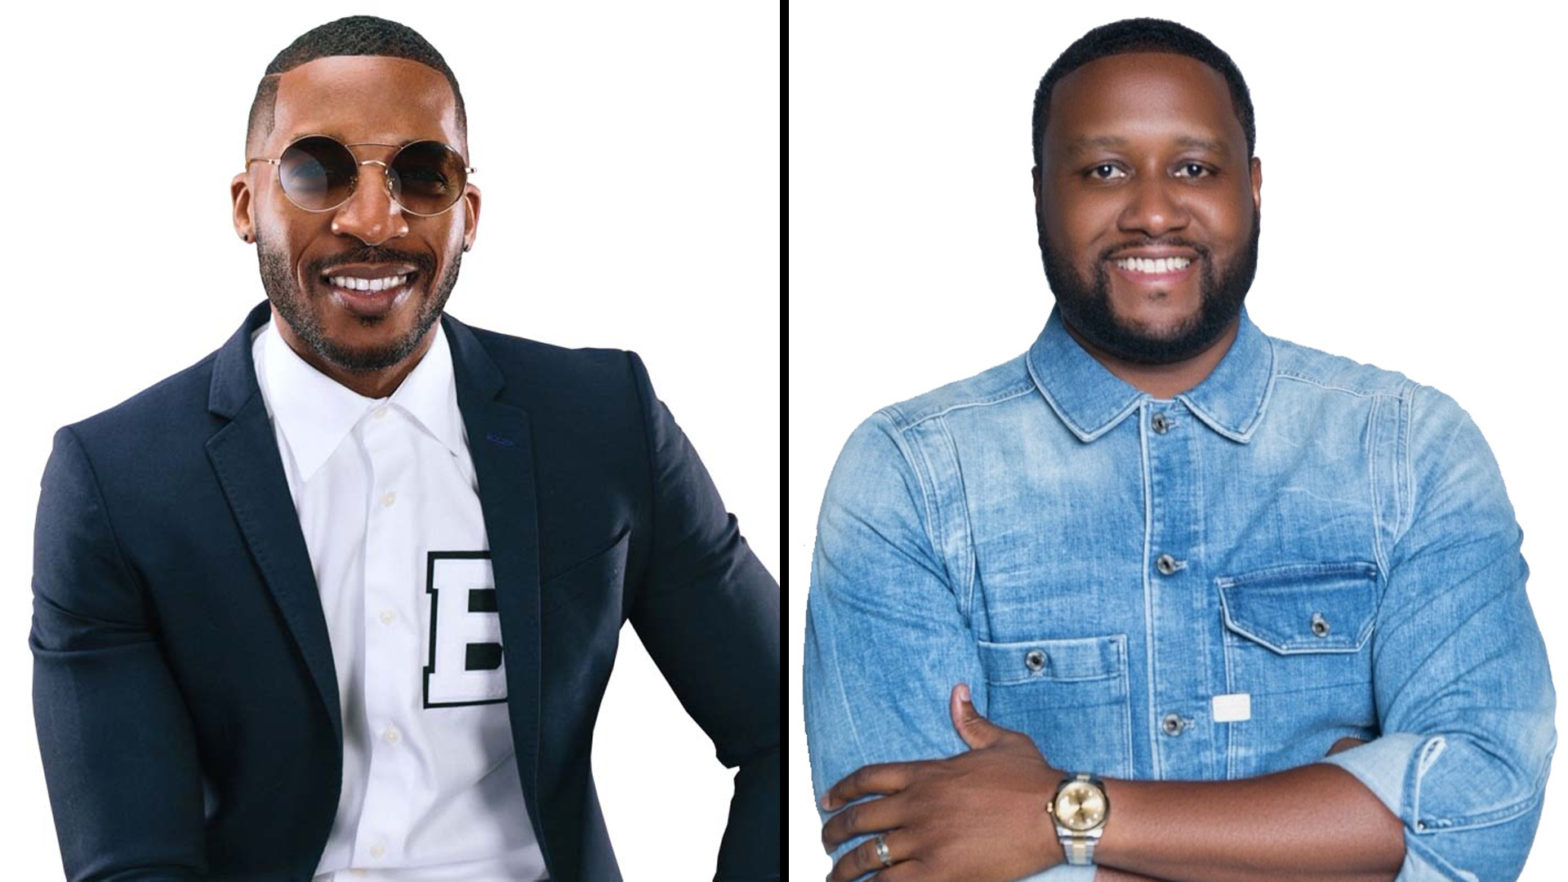 The Men Behind FLOURYSH Team Up With Shopify To Provide Free Resources To One Million Black-Owned Businesses